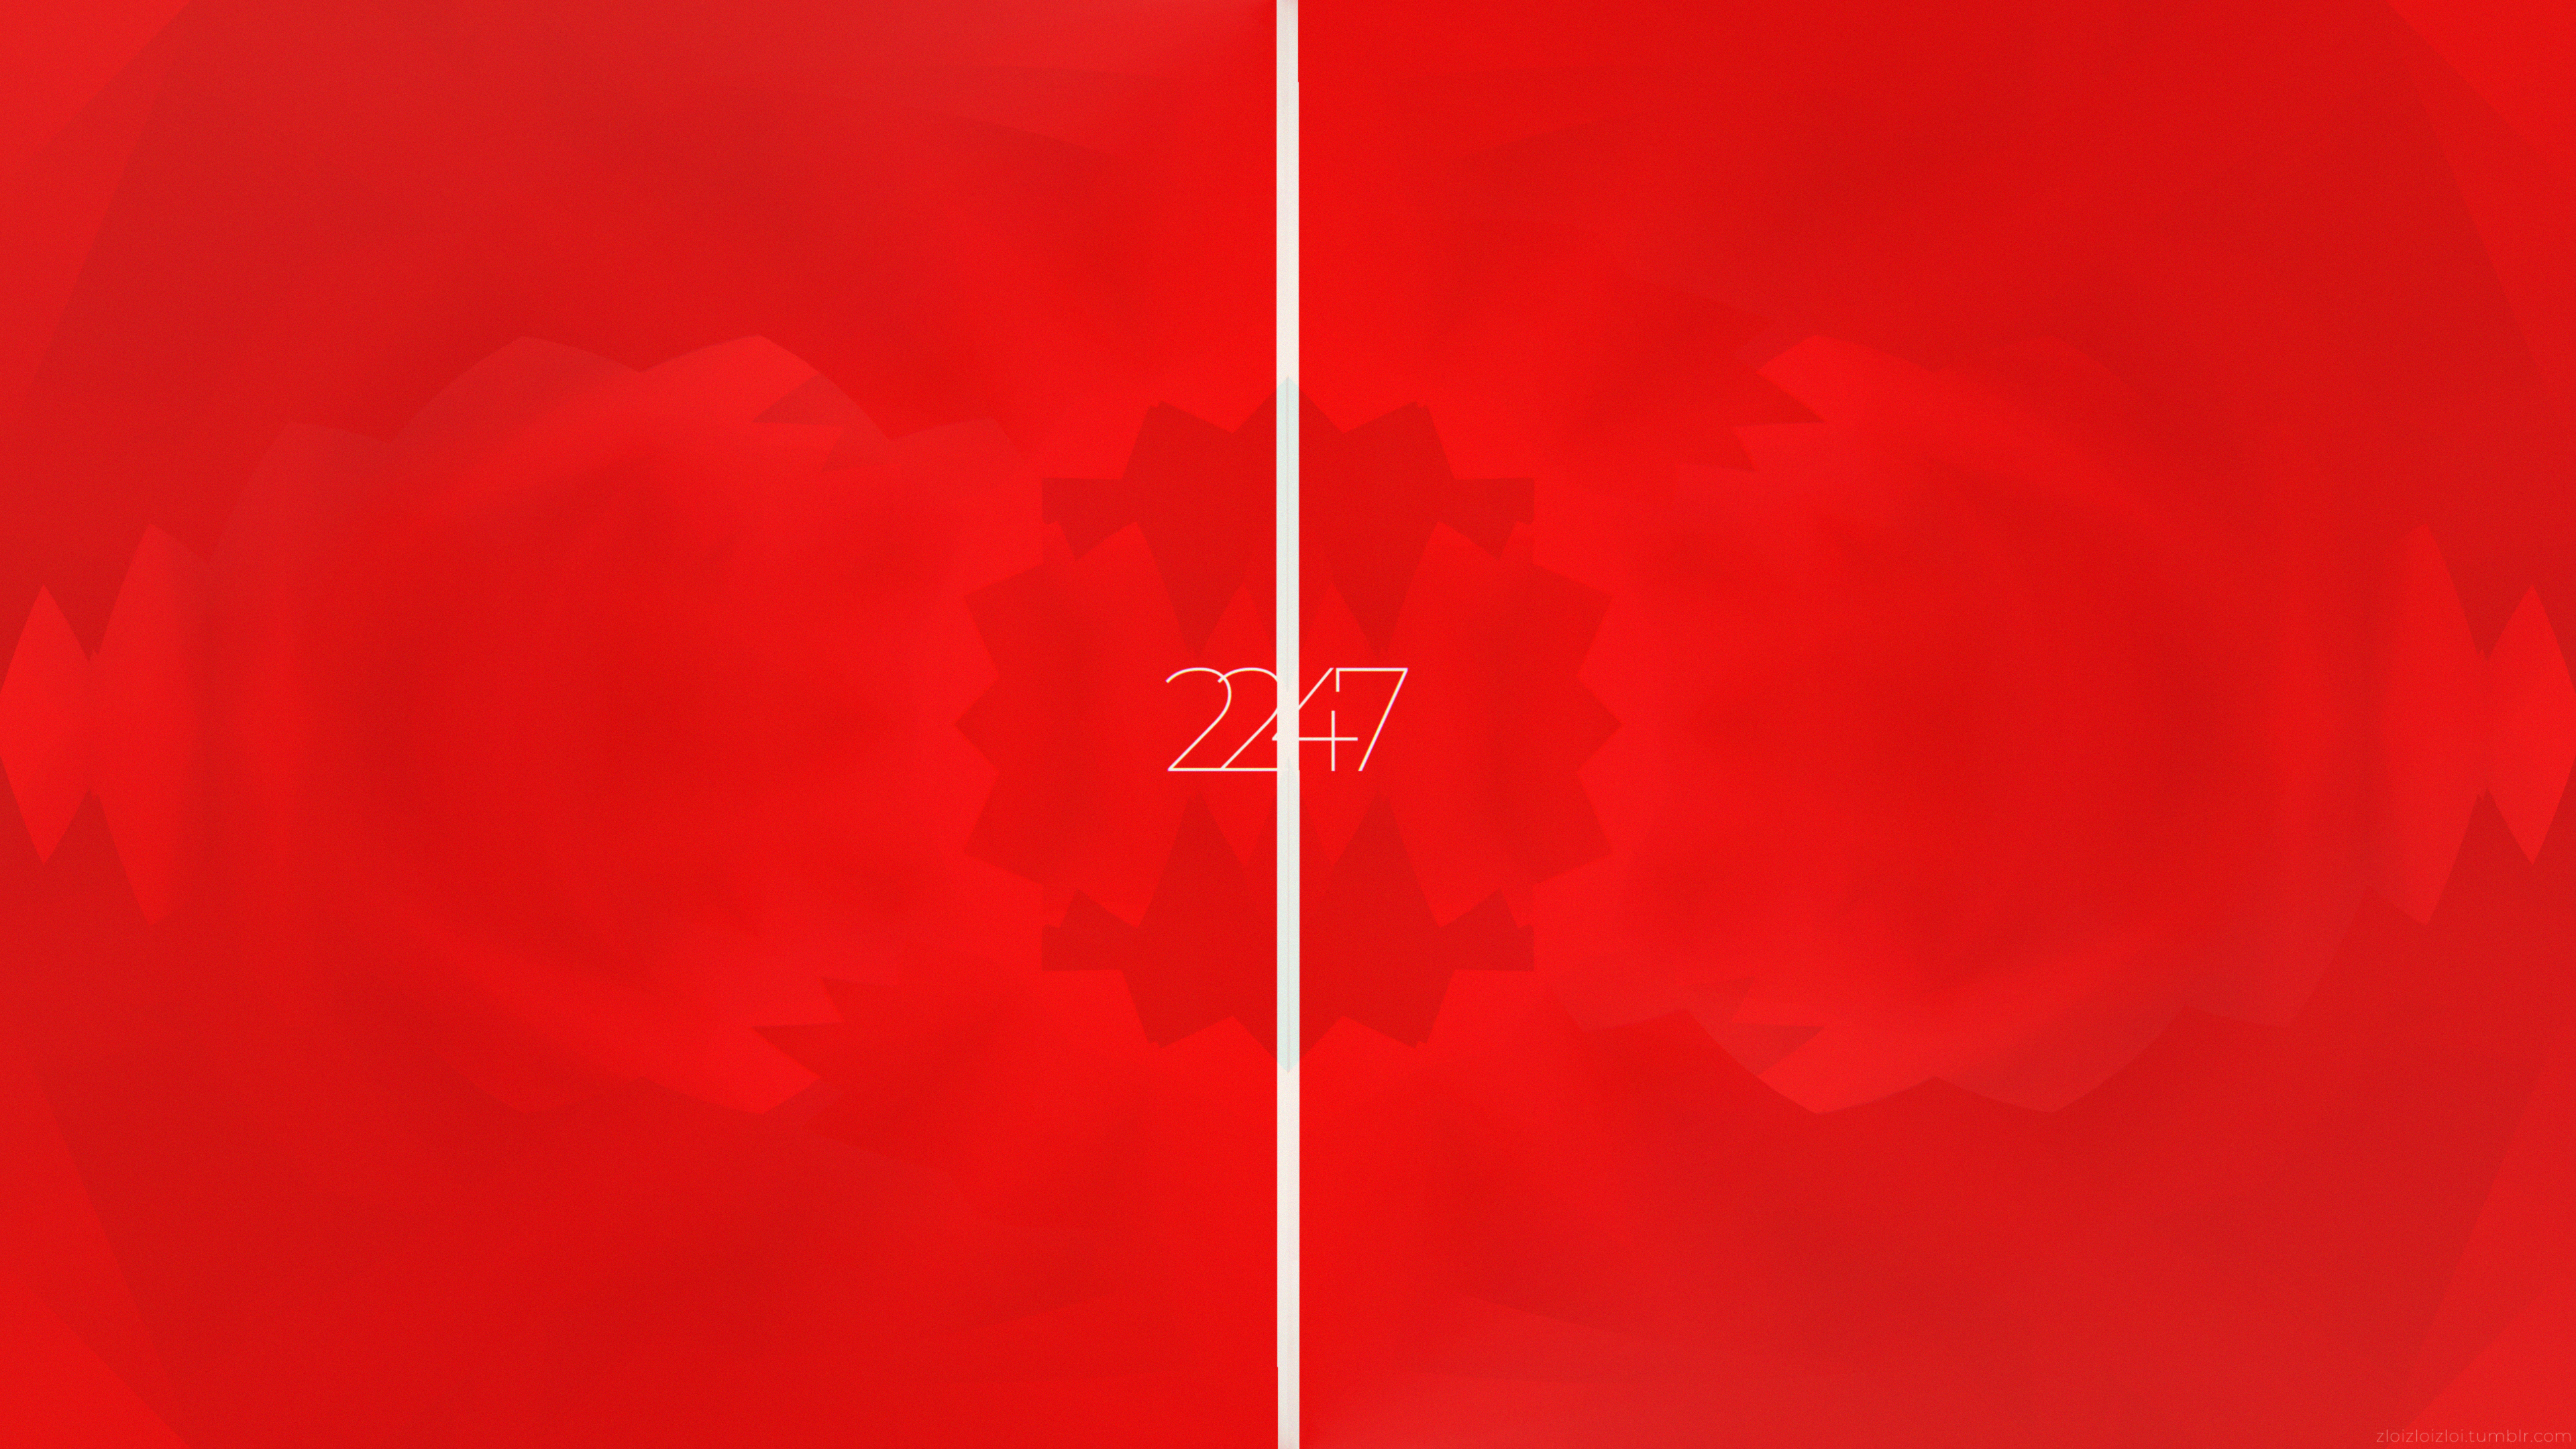 General 3840x2160 glitch art abstract digital art red background numbers red